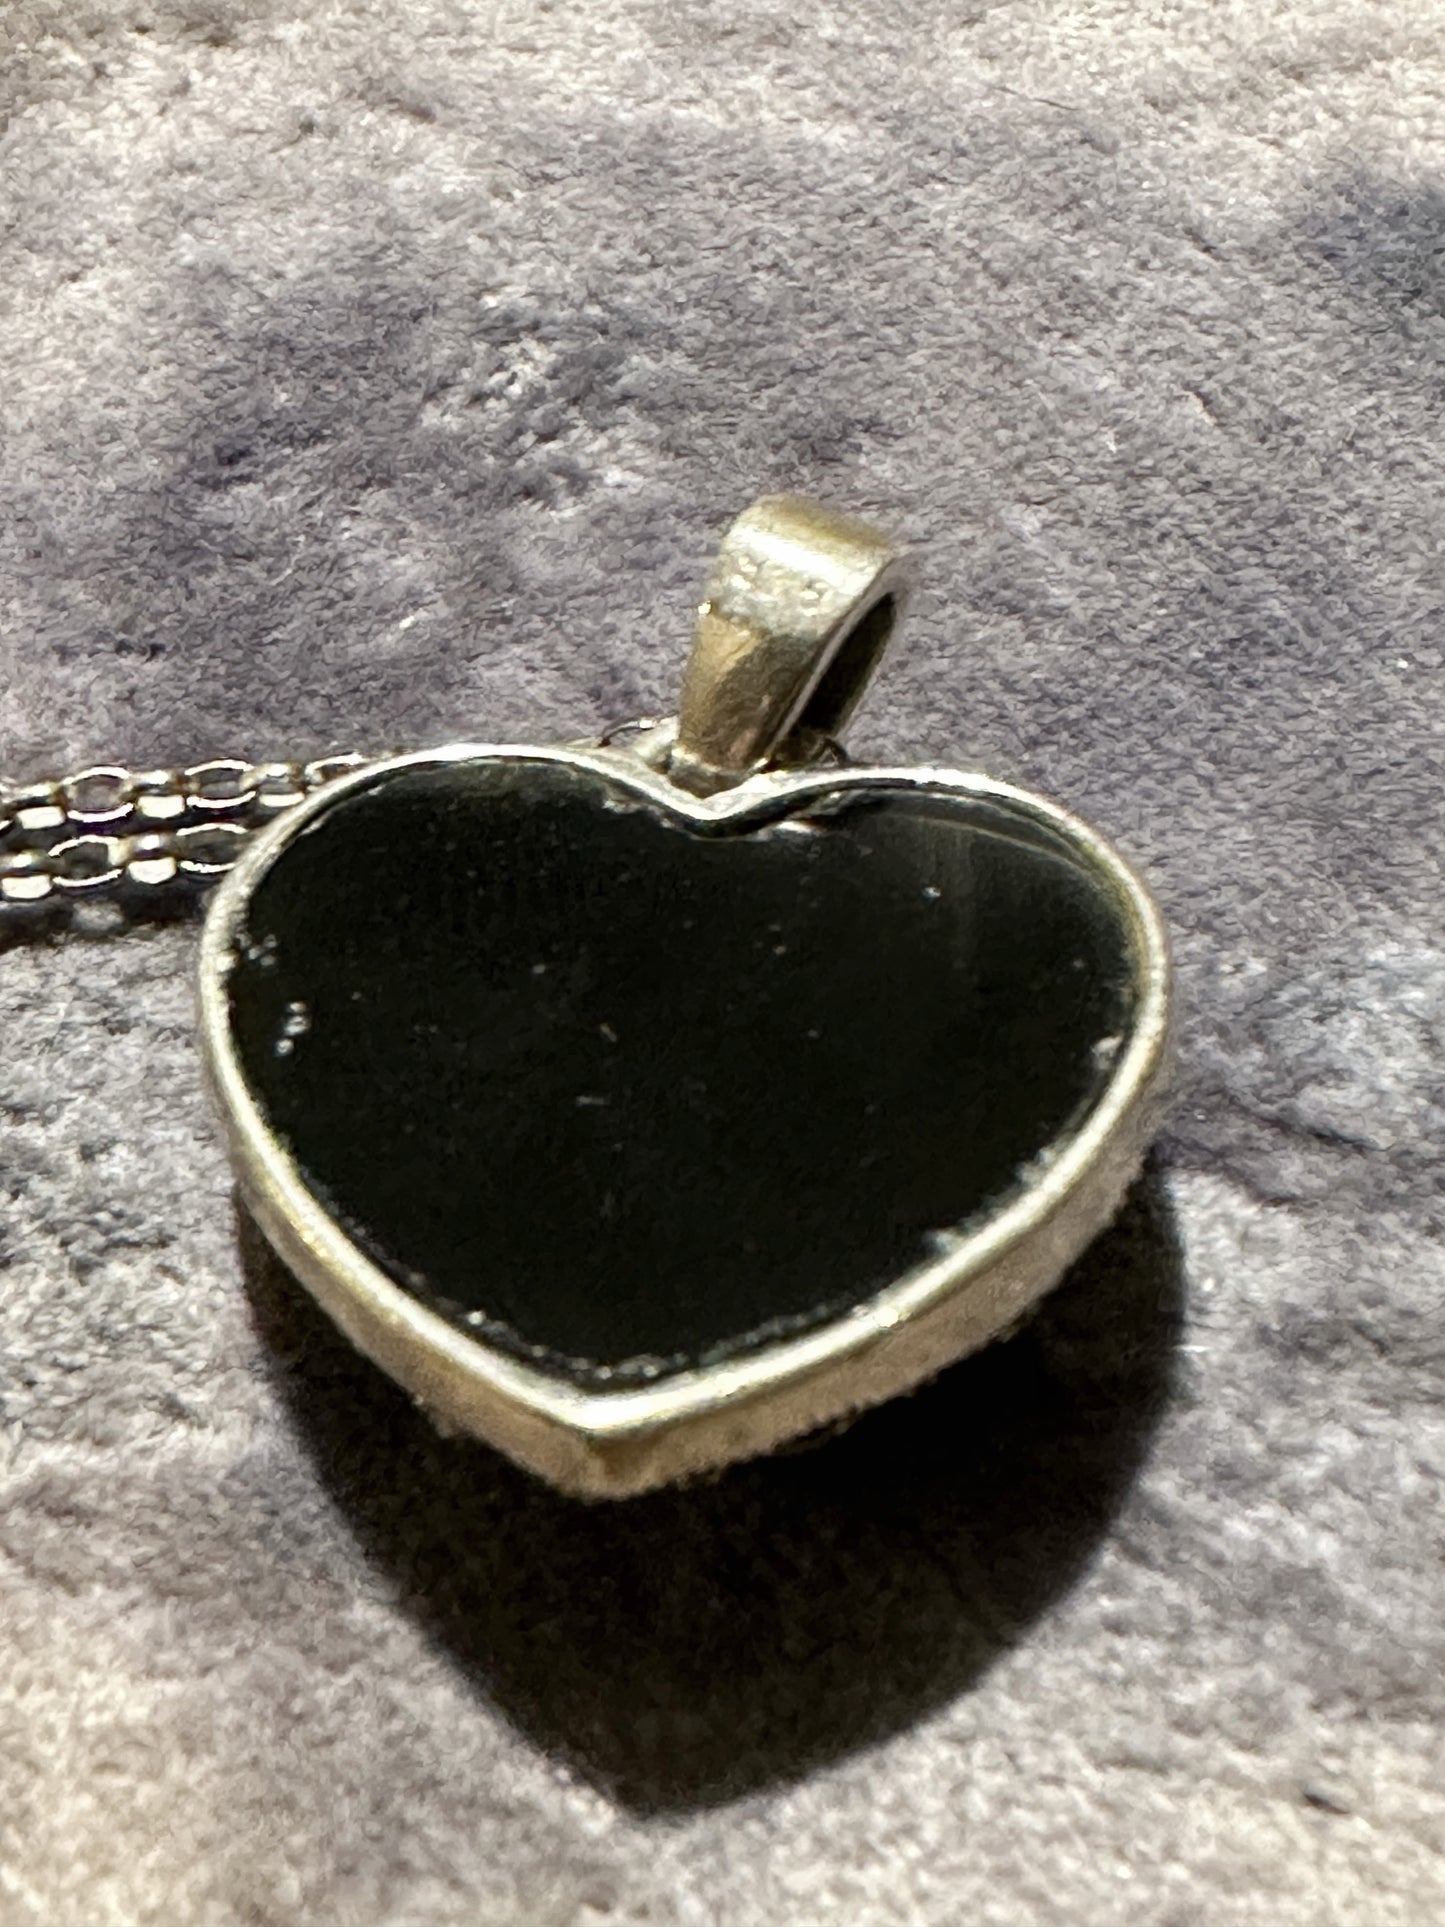 Stunning antique marcasite and black onyx stone heart pendant and chain